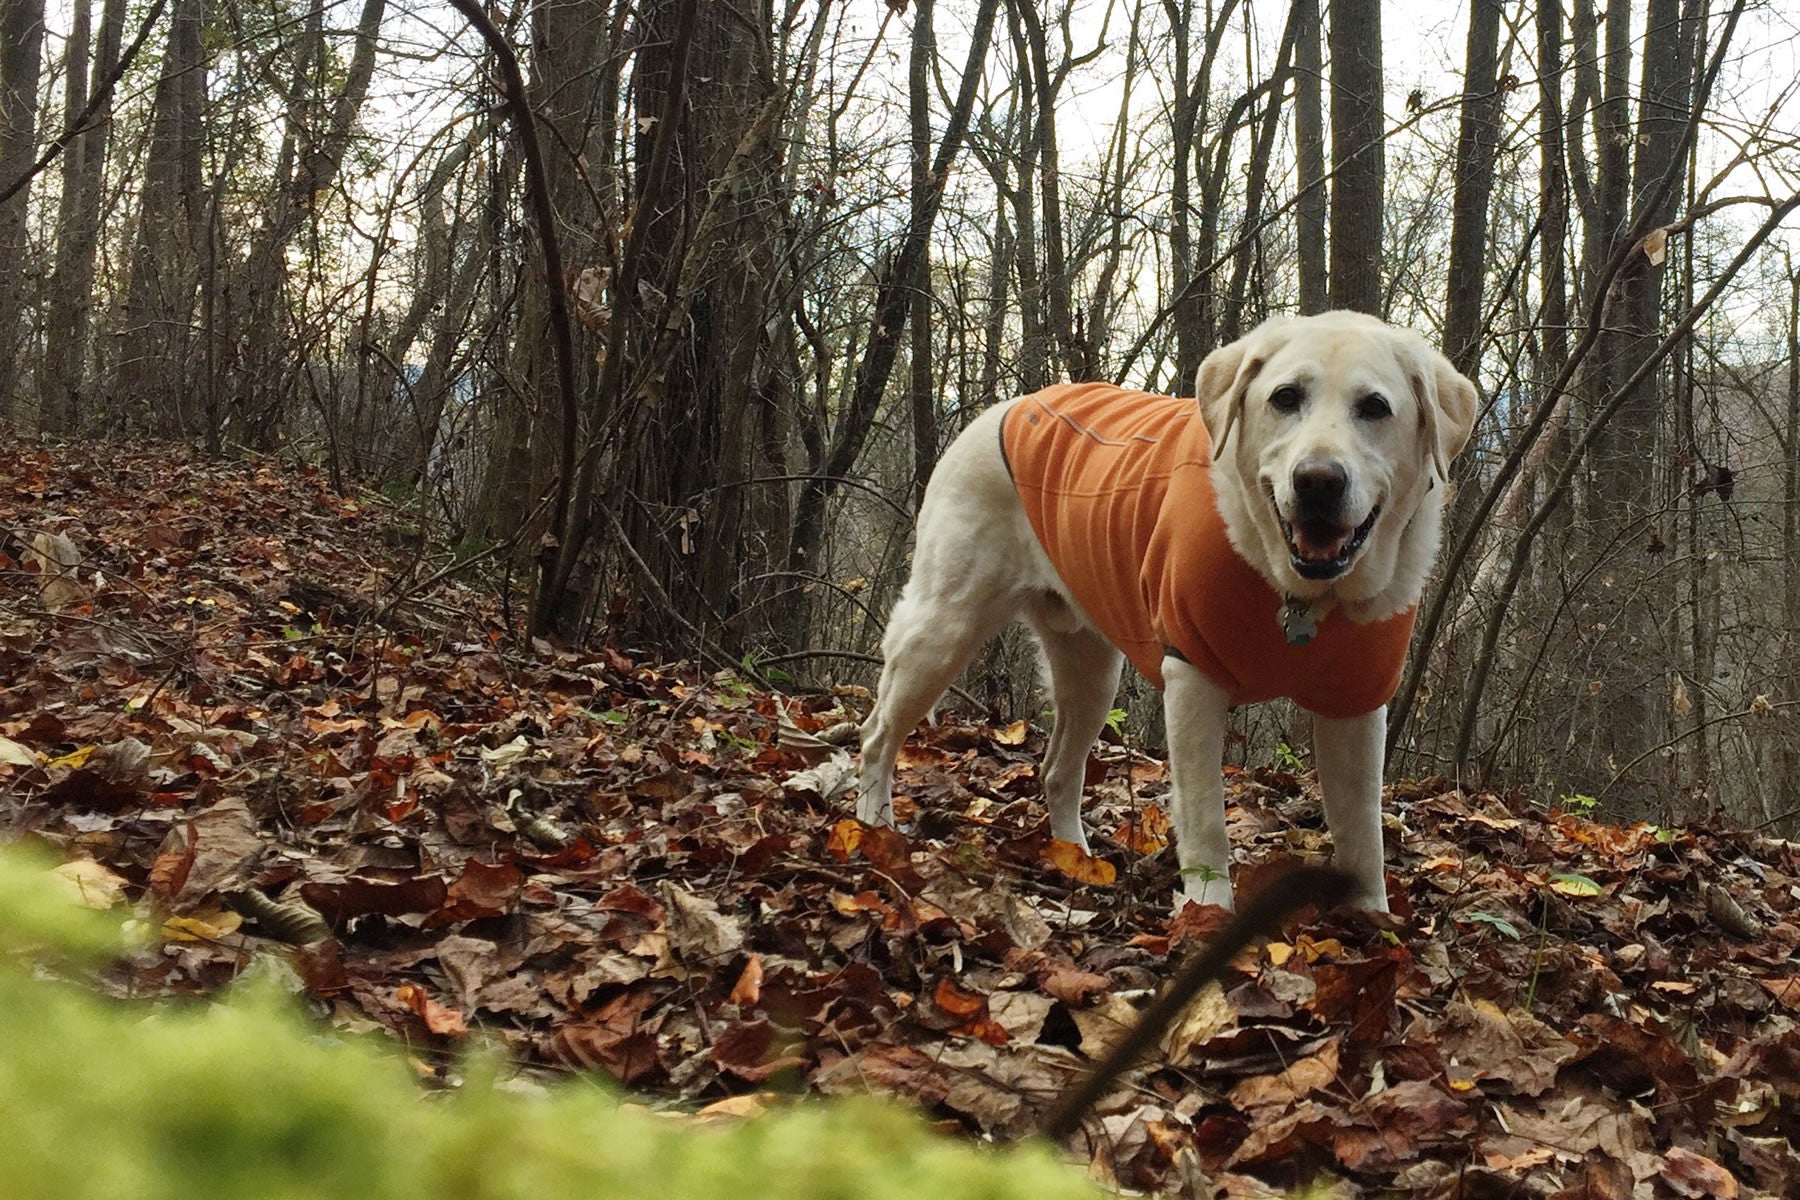 Baylor in Climate Changer Fleece Jacket stands in a pile of leaves in the woods.